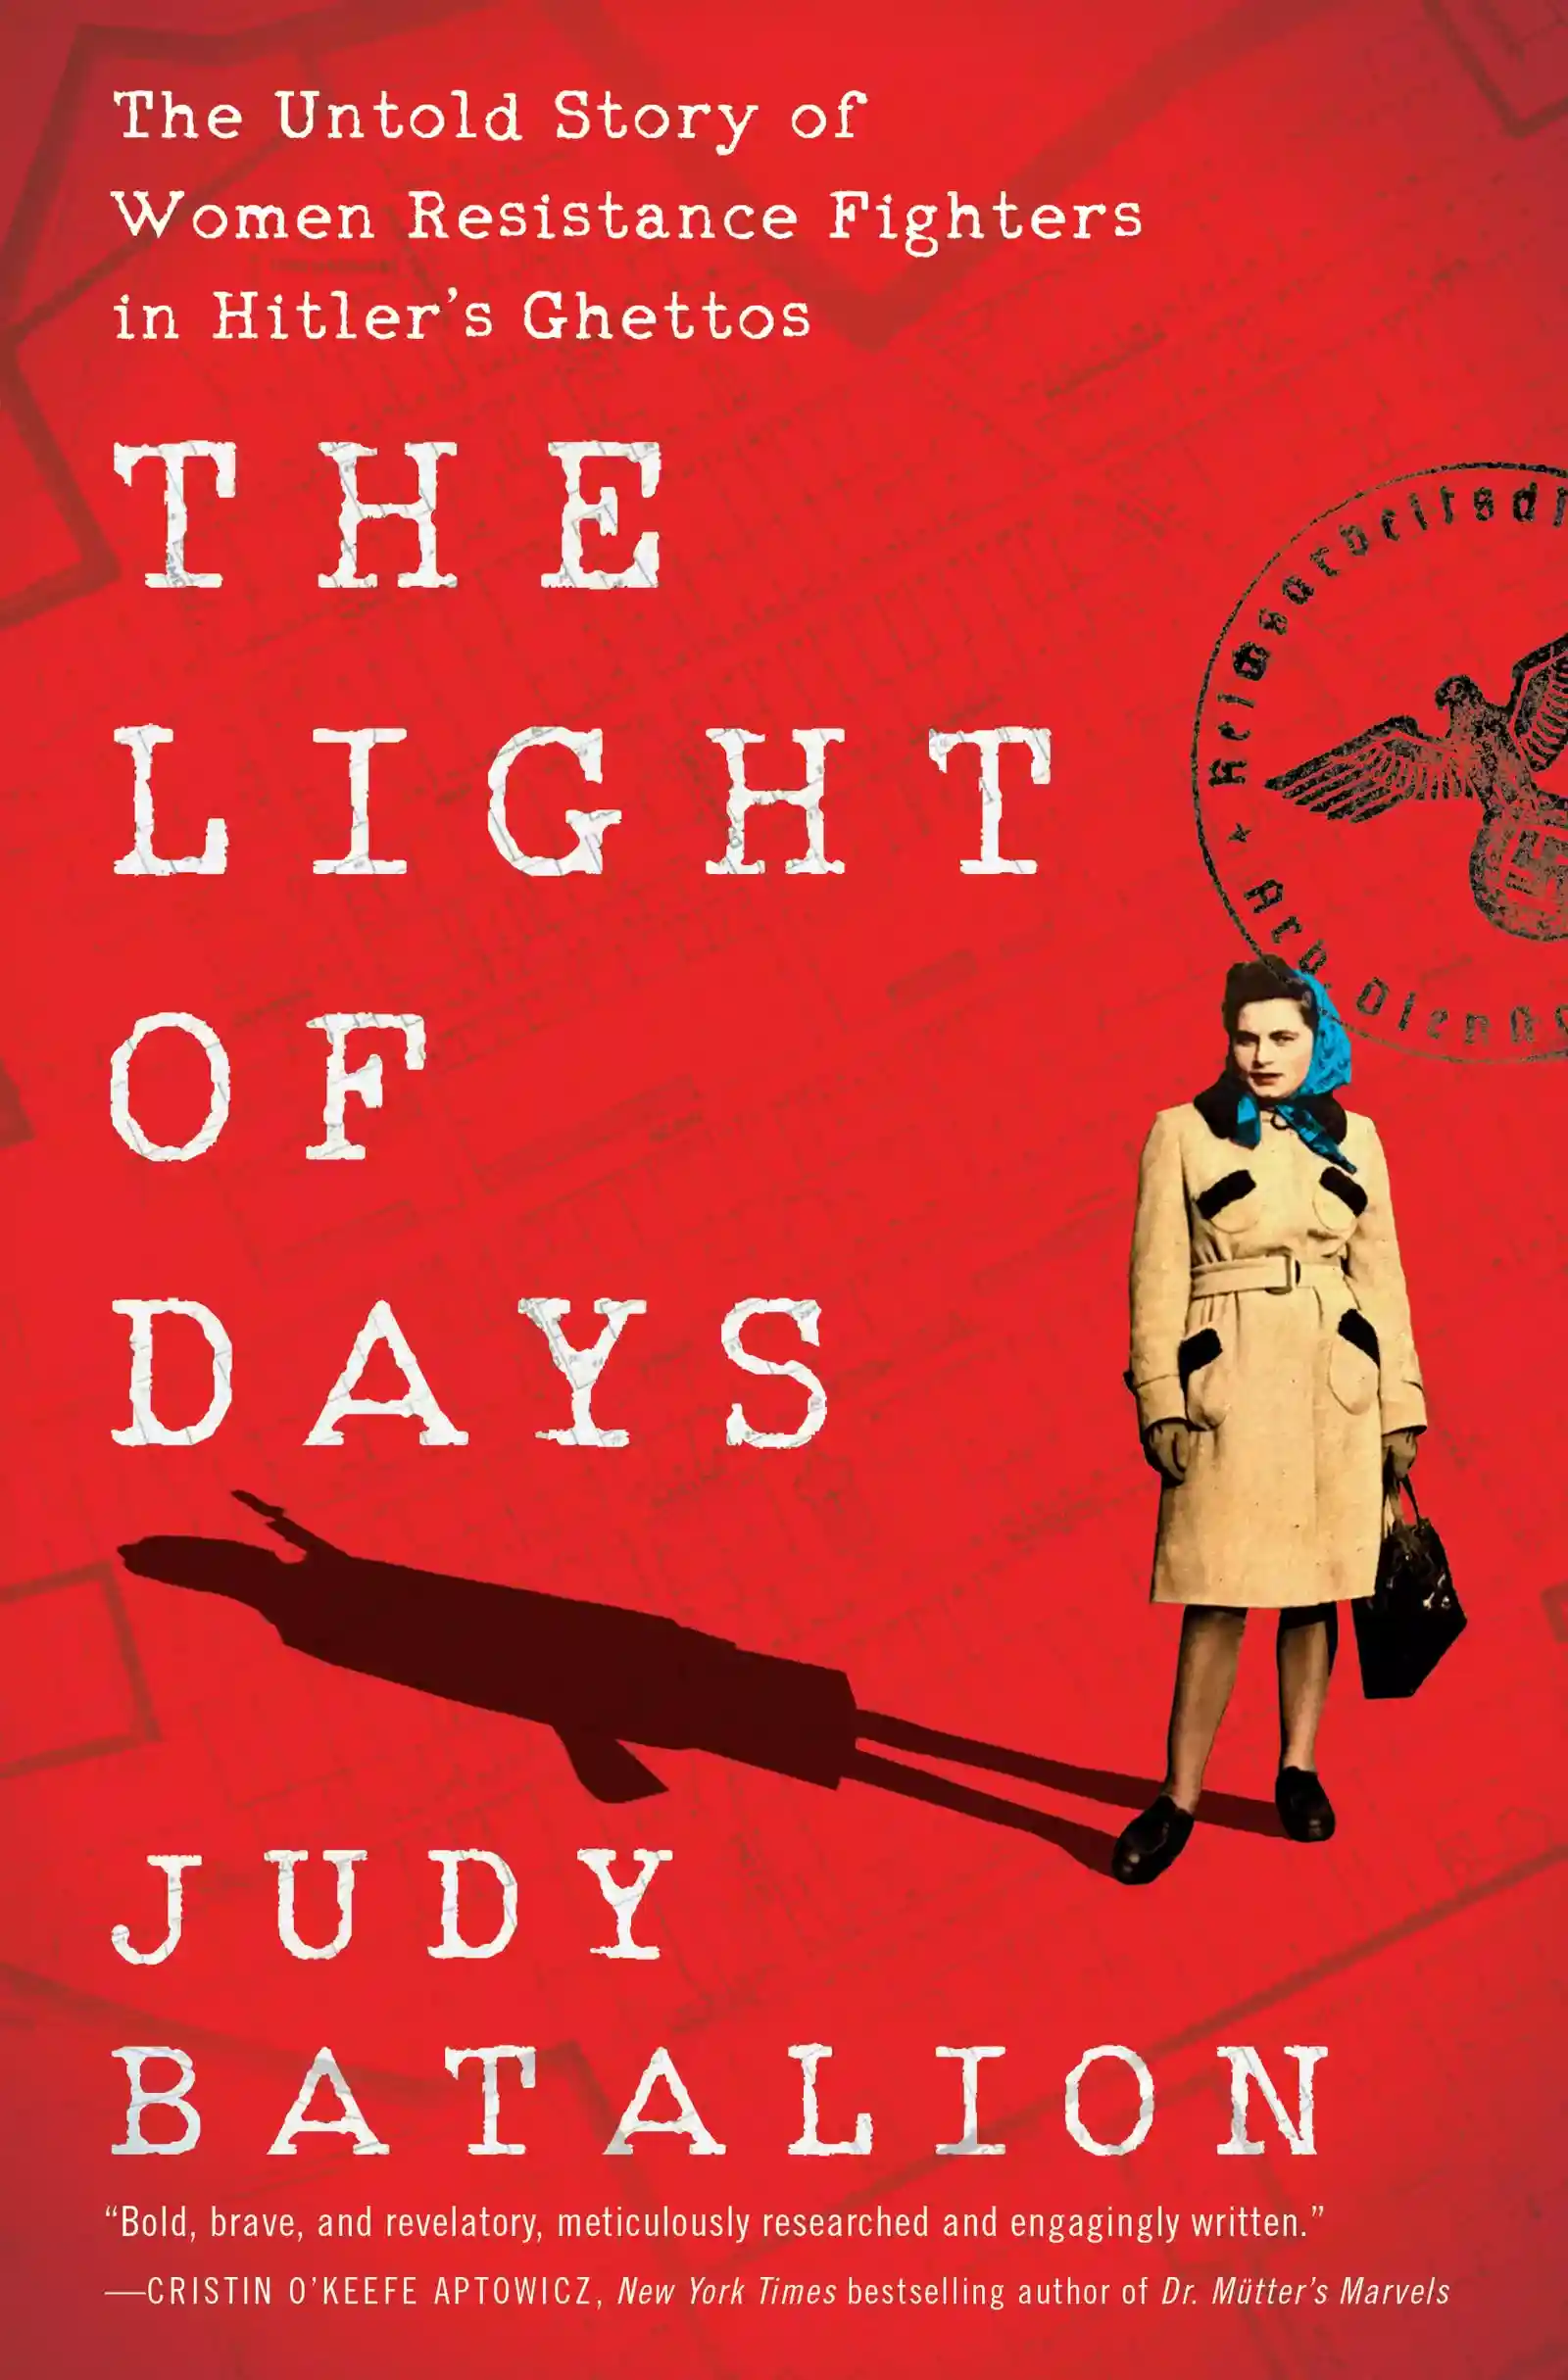 The Light of Days: The Untold Story of Women Resistance Fighters in Hitler's Ghettos by Judy Batalion